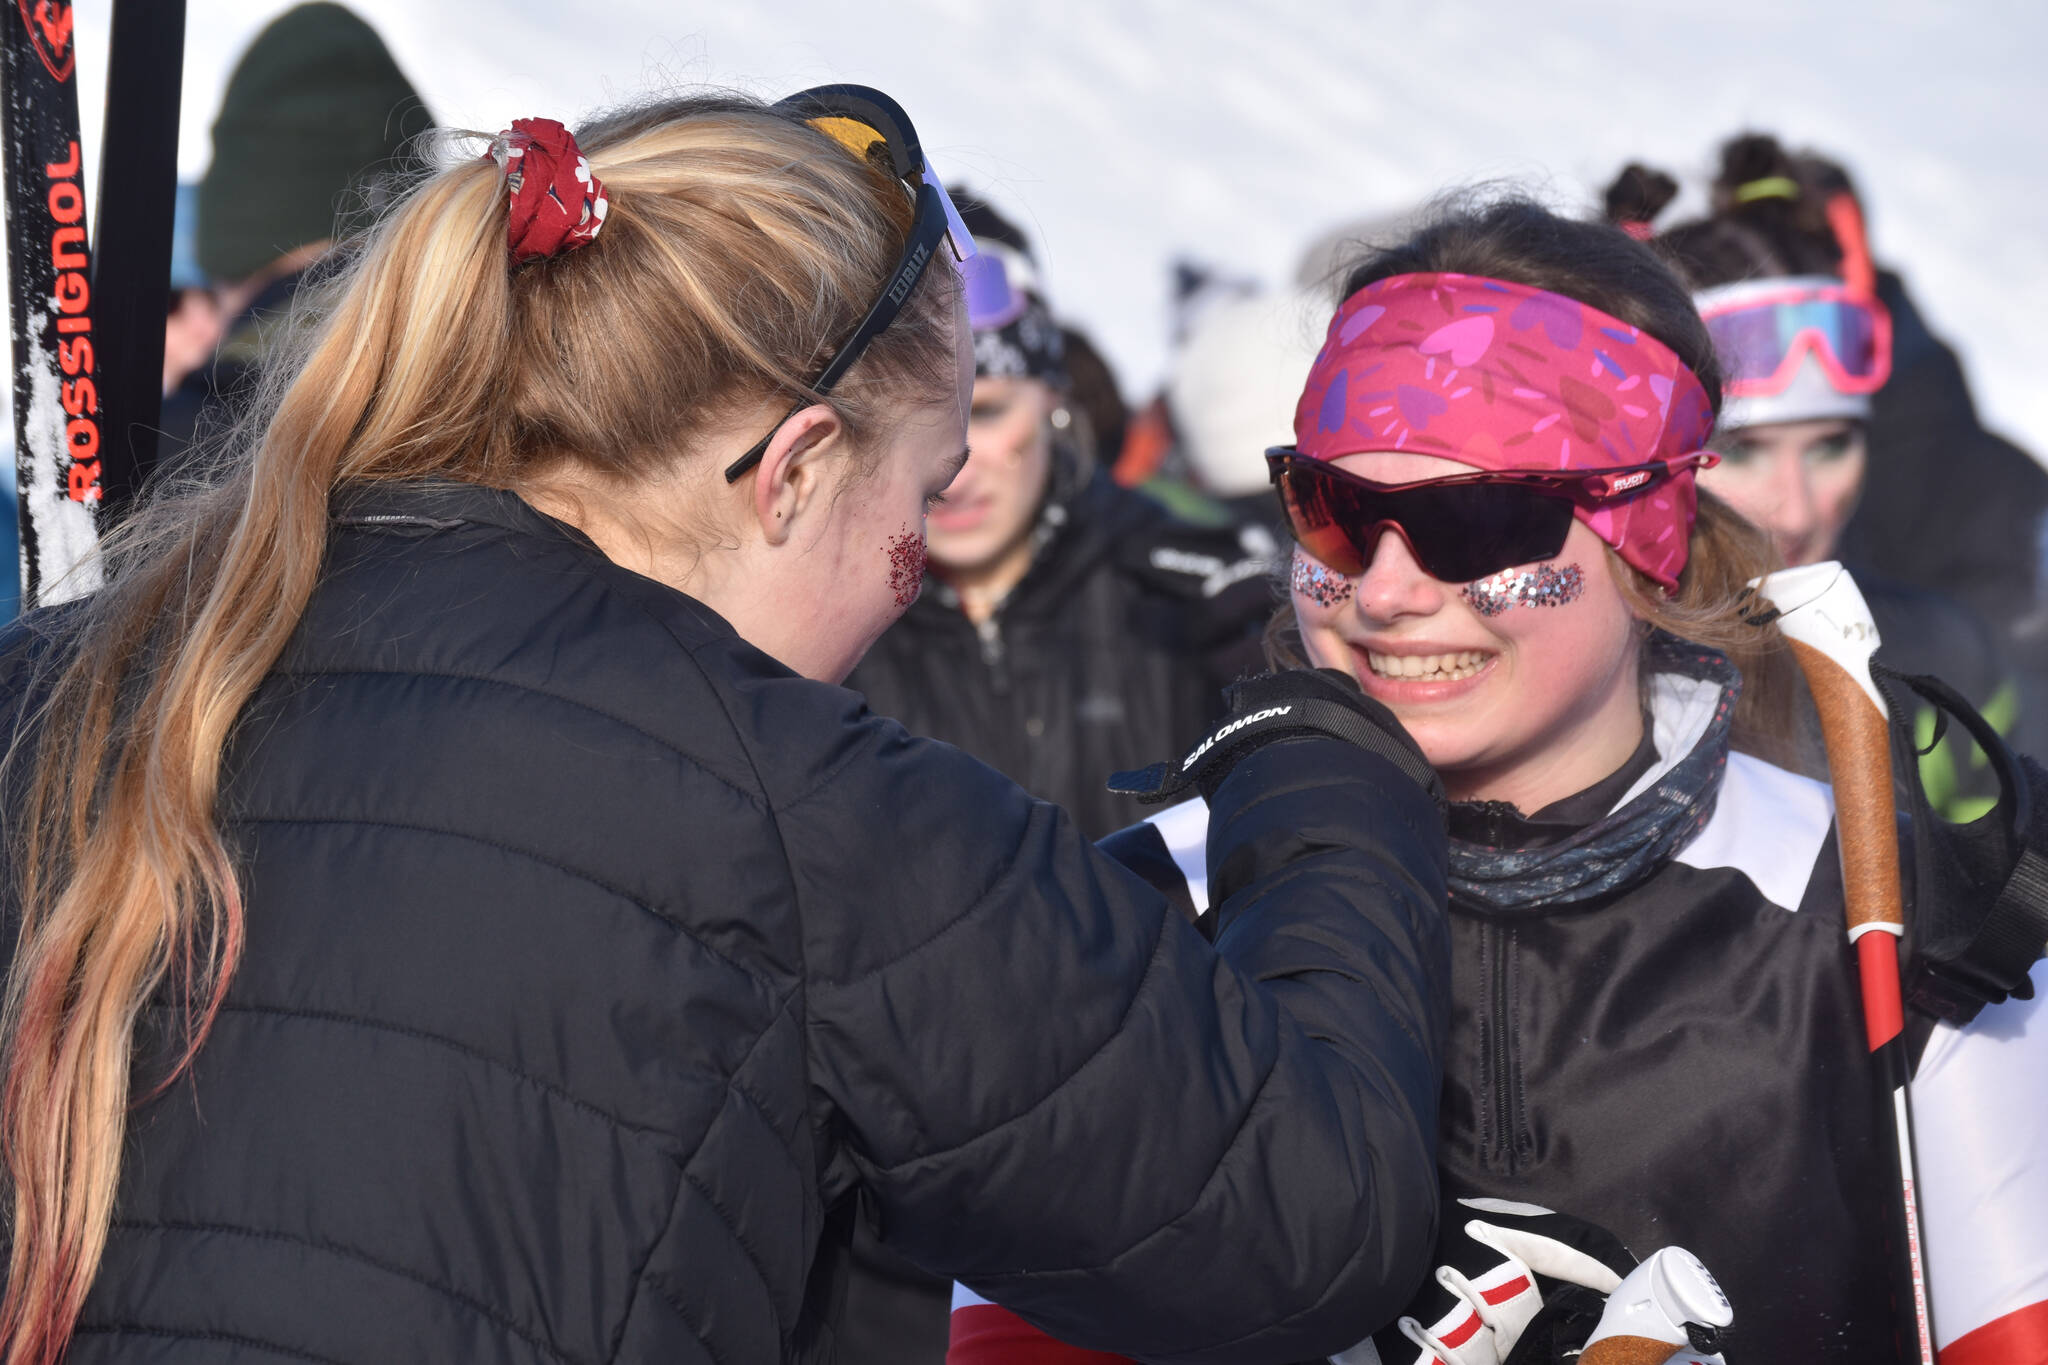 Kenai’s Madison McDonald smiles after completing the last leg of the girls 4x3.5-kilometer relay at the ASAA State Nordic Ski Championships at Kincaid Park in Anchorage, Alaska, on Saturday, Feb. 25, 2023. (Jake Dye/Peninsula Clarion)